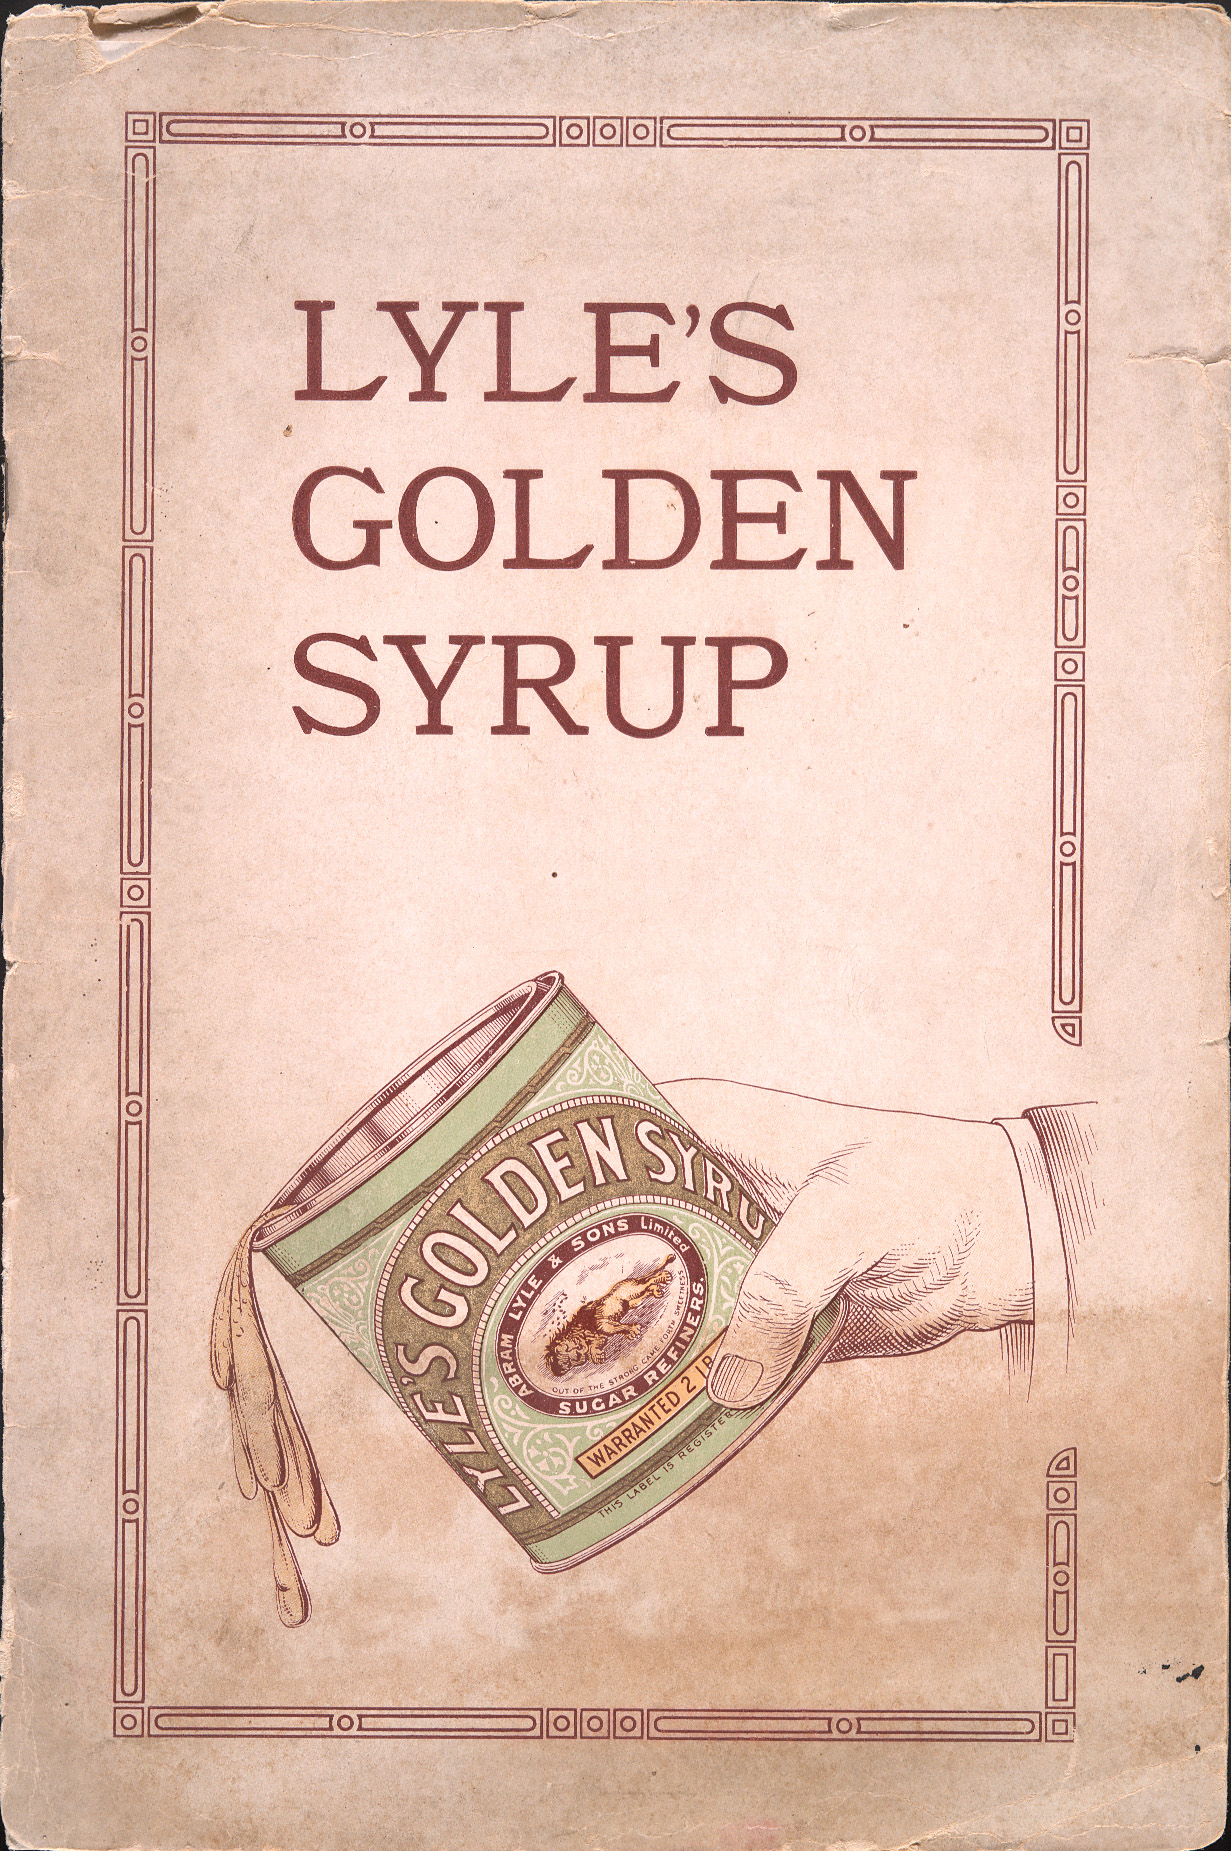 Lyle’s Golden Syrup. 